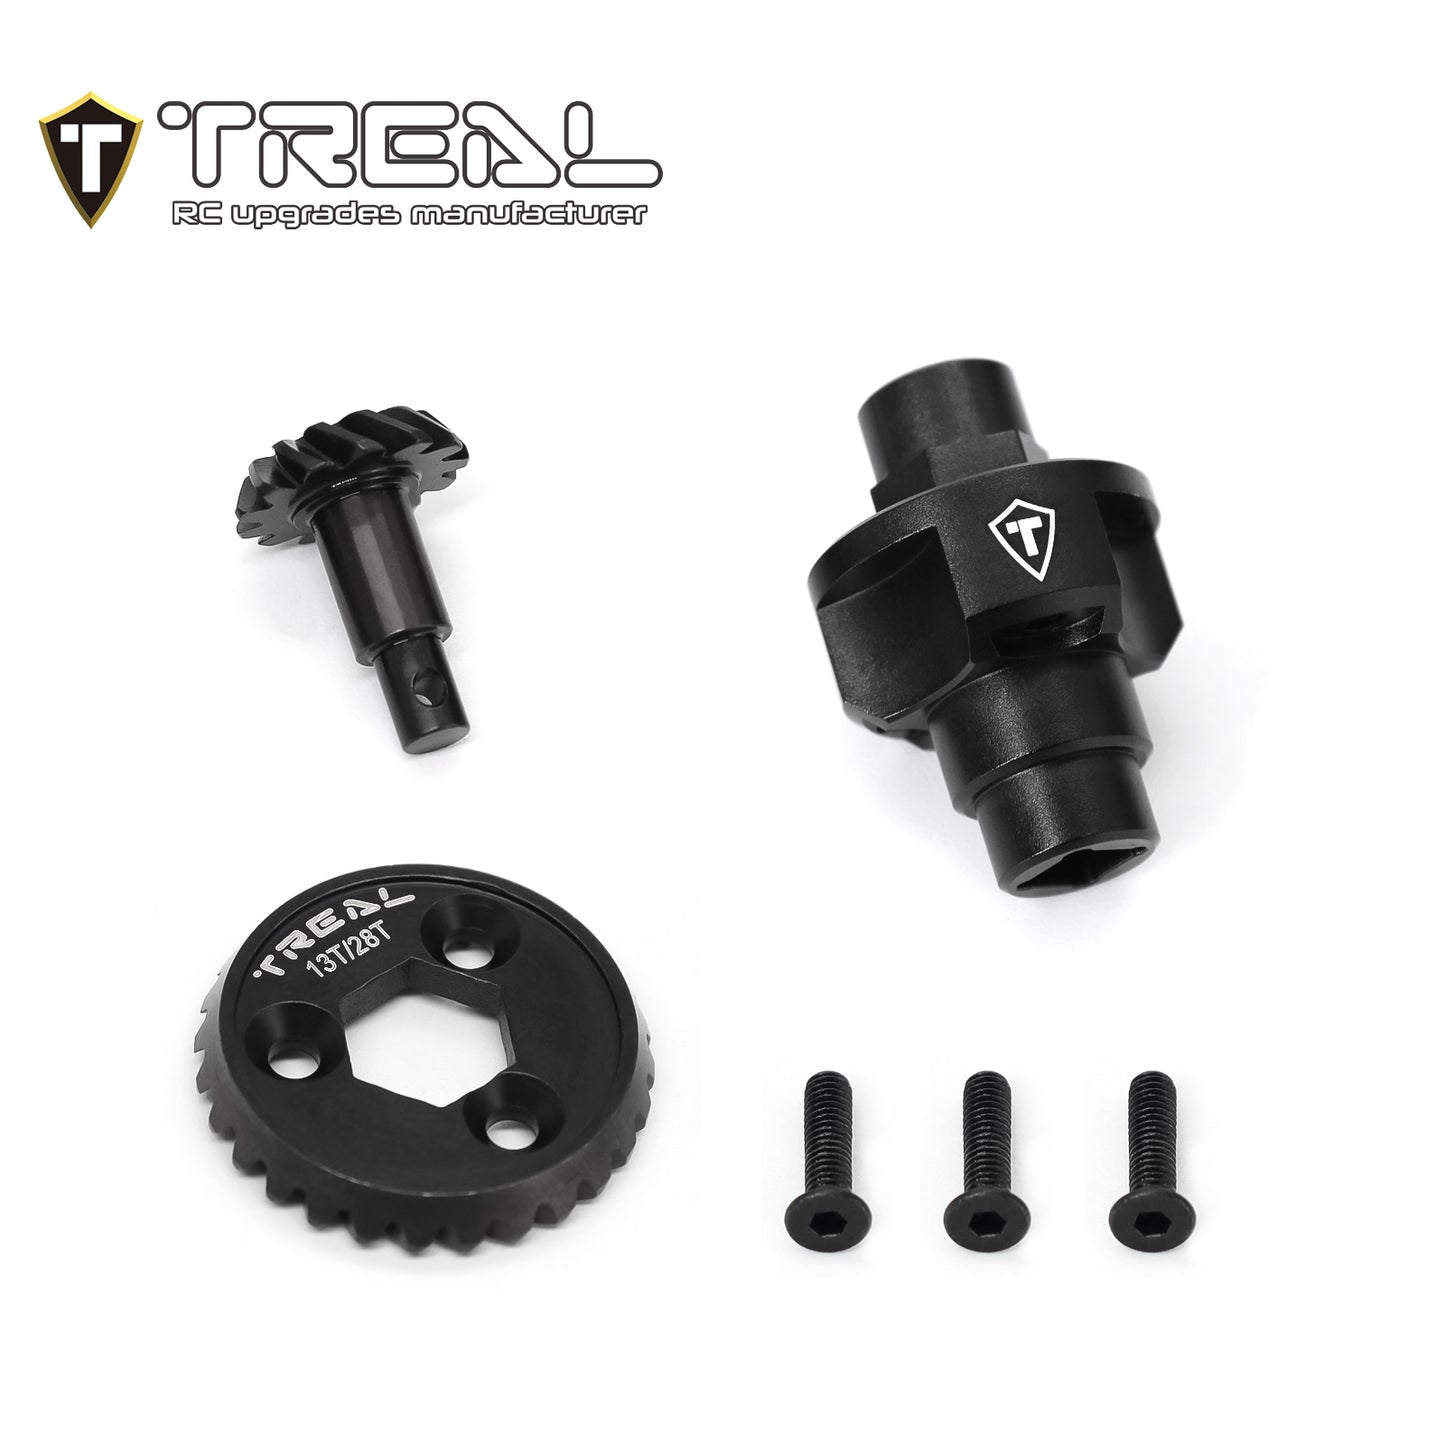 TREAL HD Steel Axle Overdrive Gear Set - 13T/28T (17% Overdrive) for 1/18 UTB18 Capra